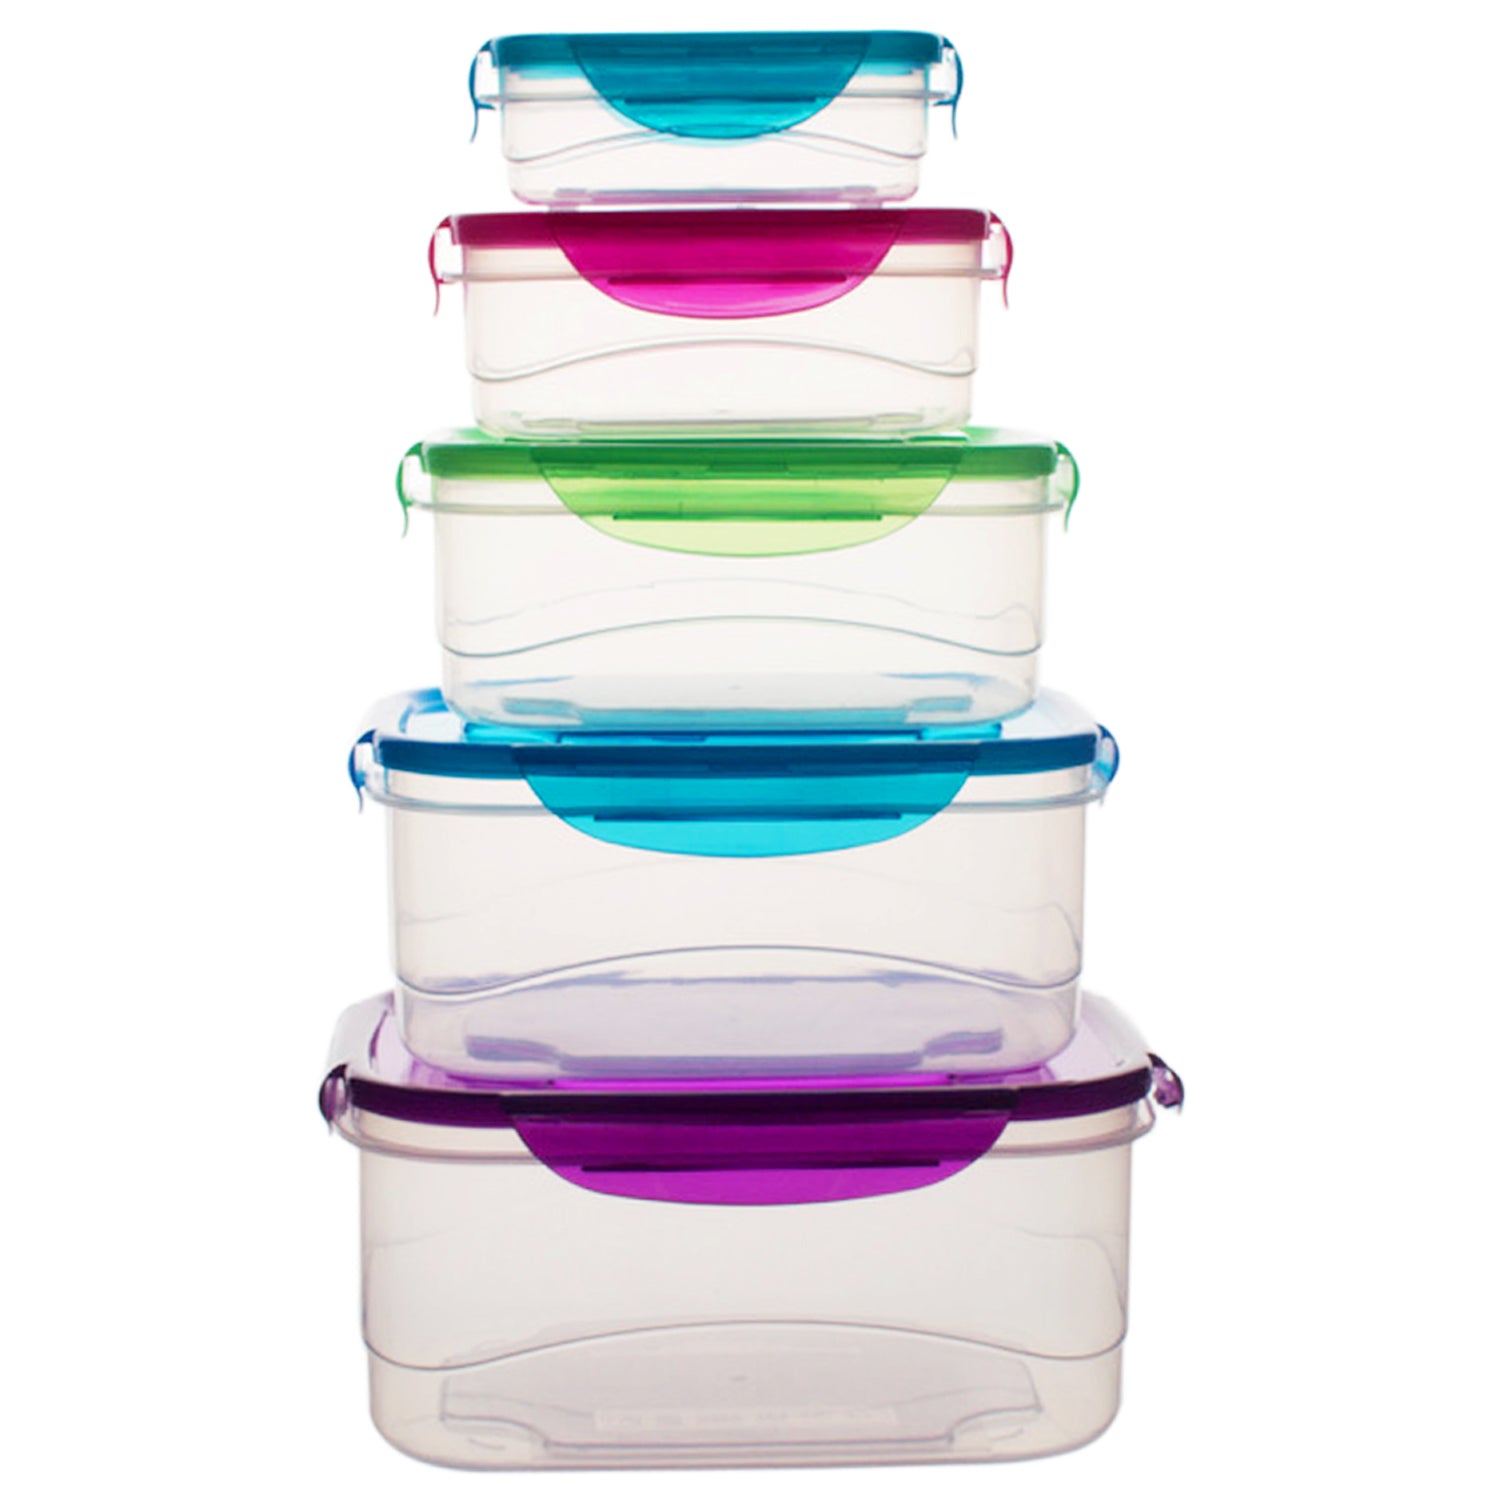 LEXI HOME 16-Piece Durable Meal Prep Plastic Food Containers with